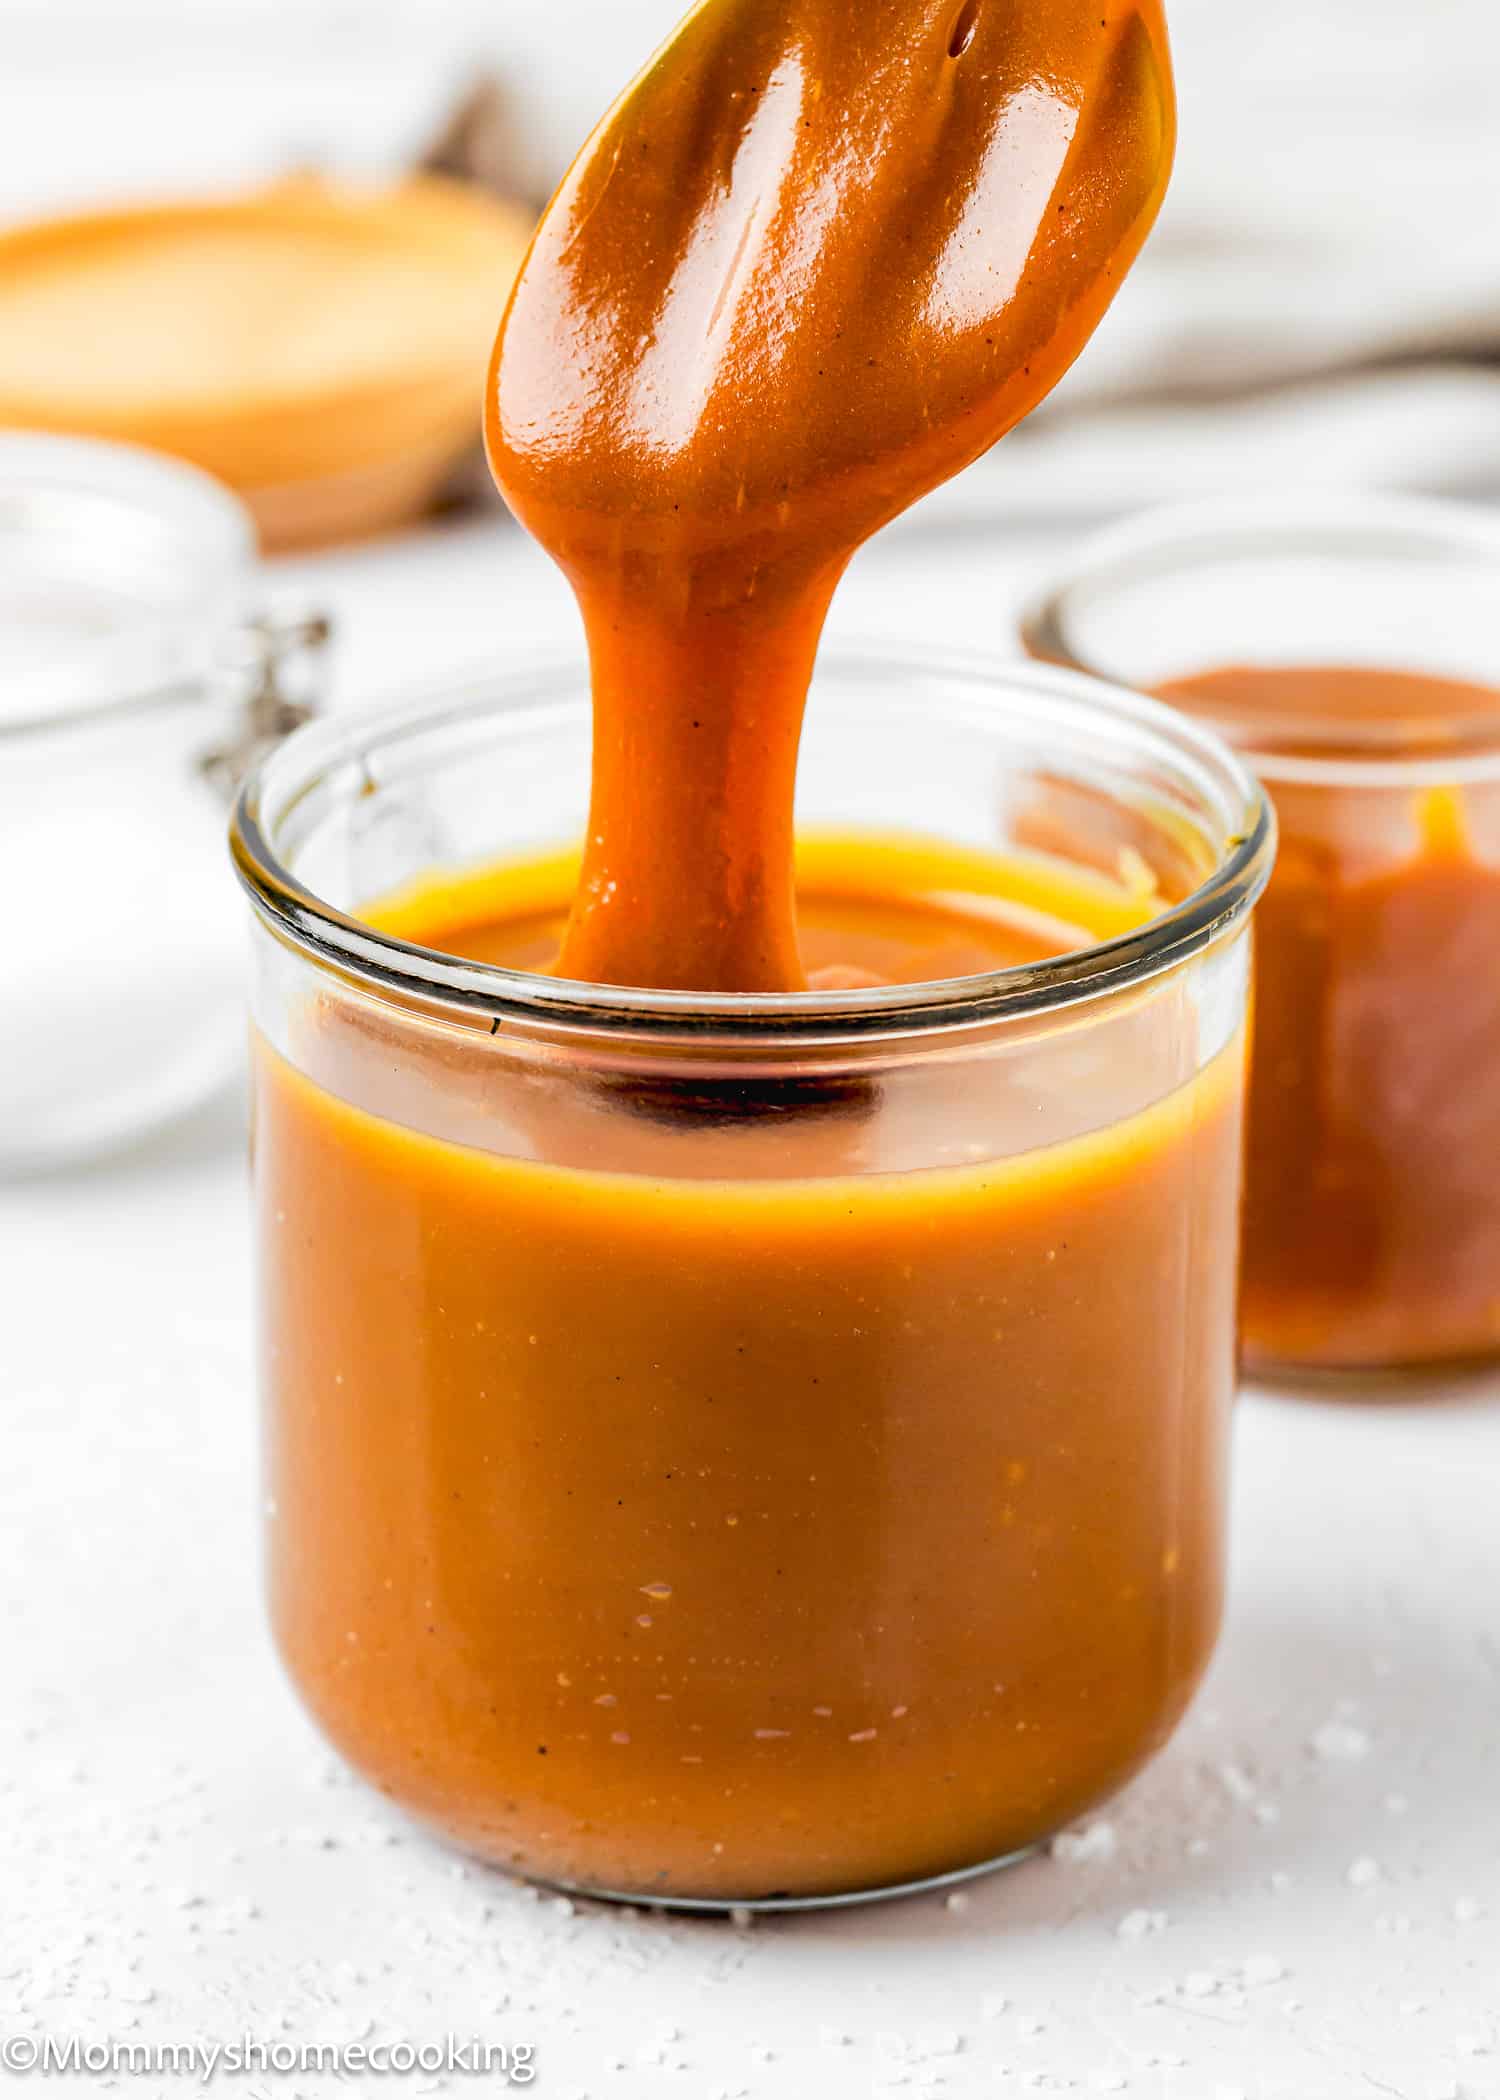 A spoon dipped into a jar of salted caramel sauce.